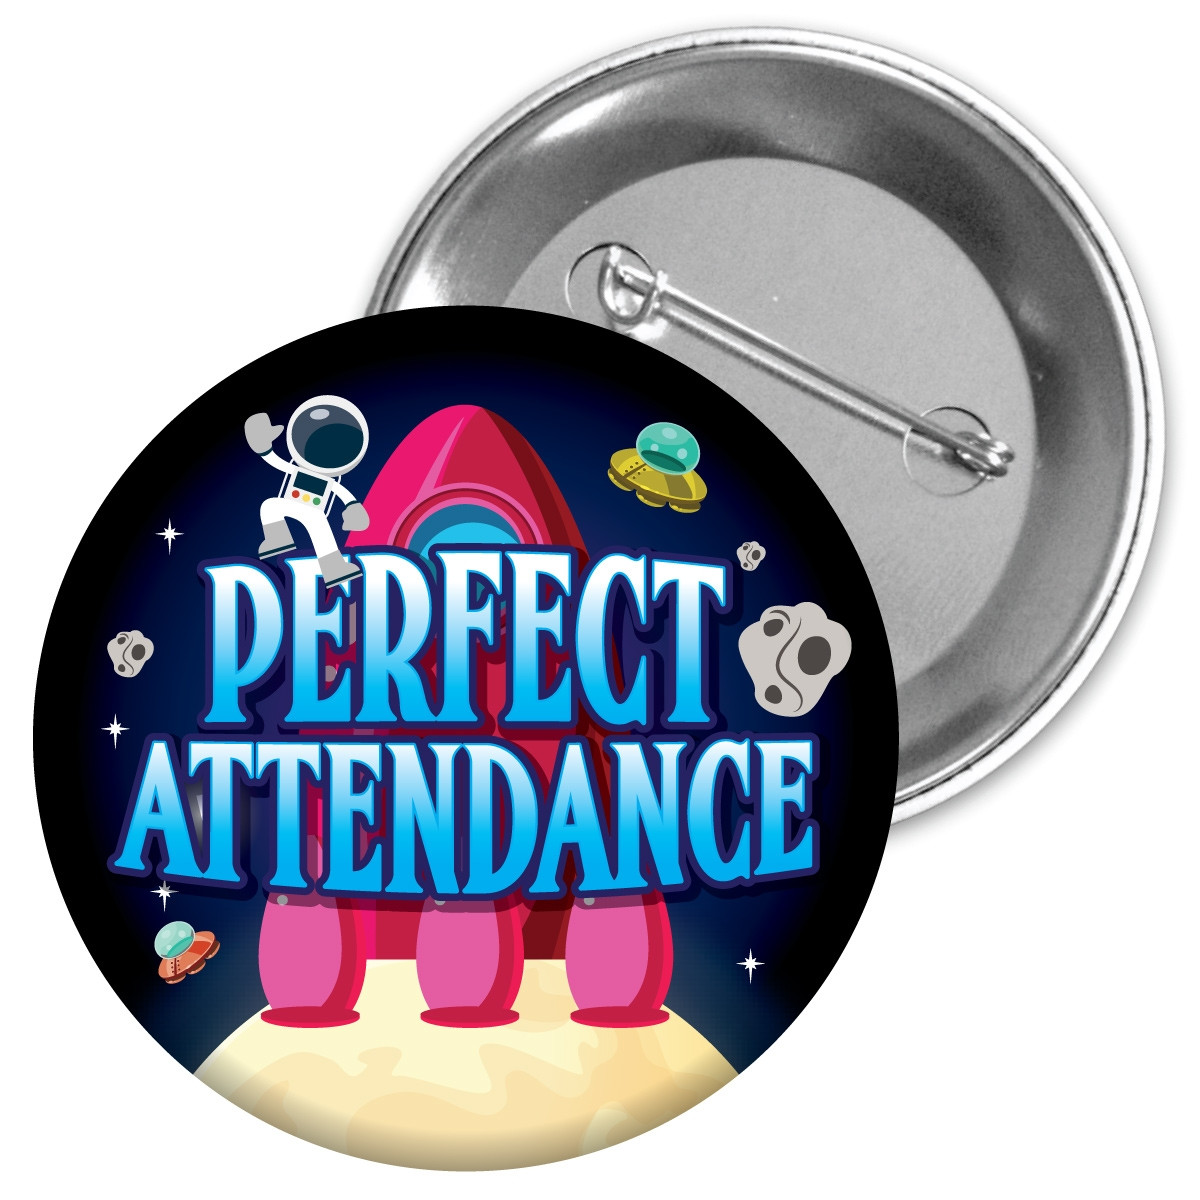 Metal Button - Perfect Attendance (Space)